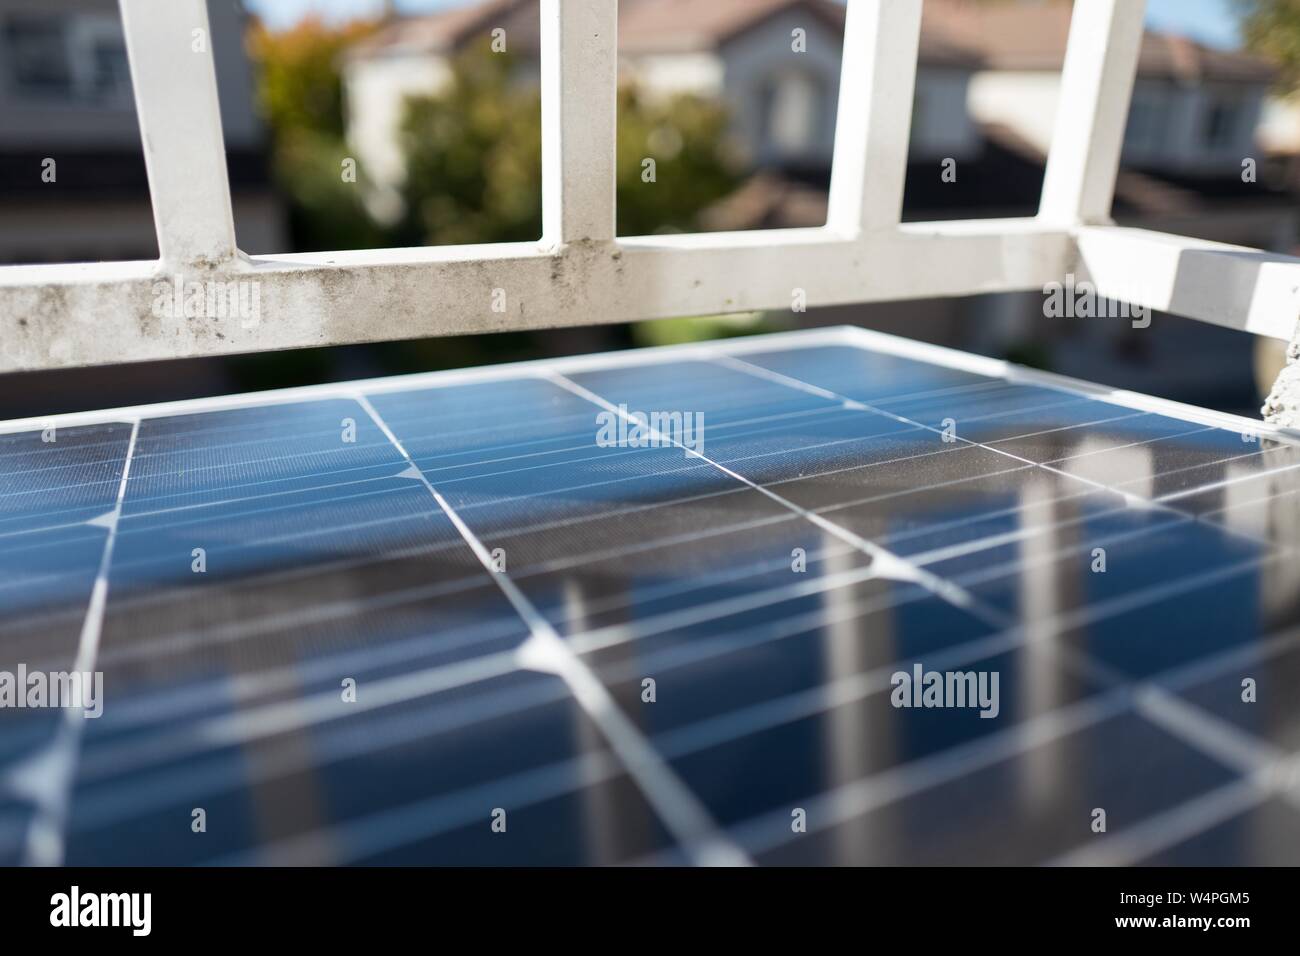 Close-up of solar photovoltaic panels from solar company Renogy, being installed as part of a residential off-grid solar system, in bright sunlight, San Ramon, California, September 10, 2018. () Stock Photo